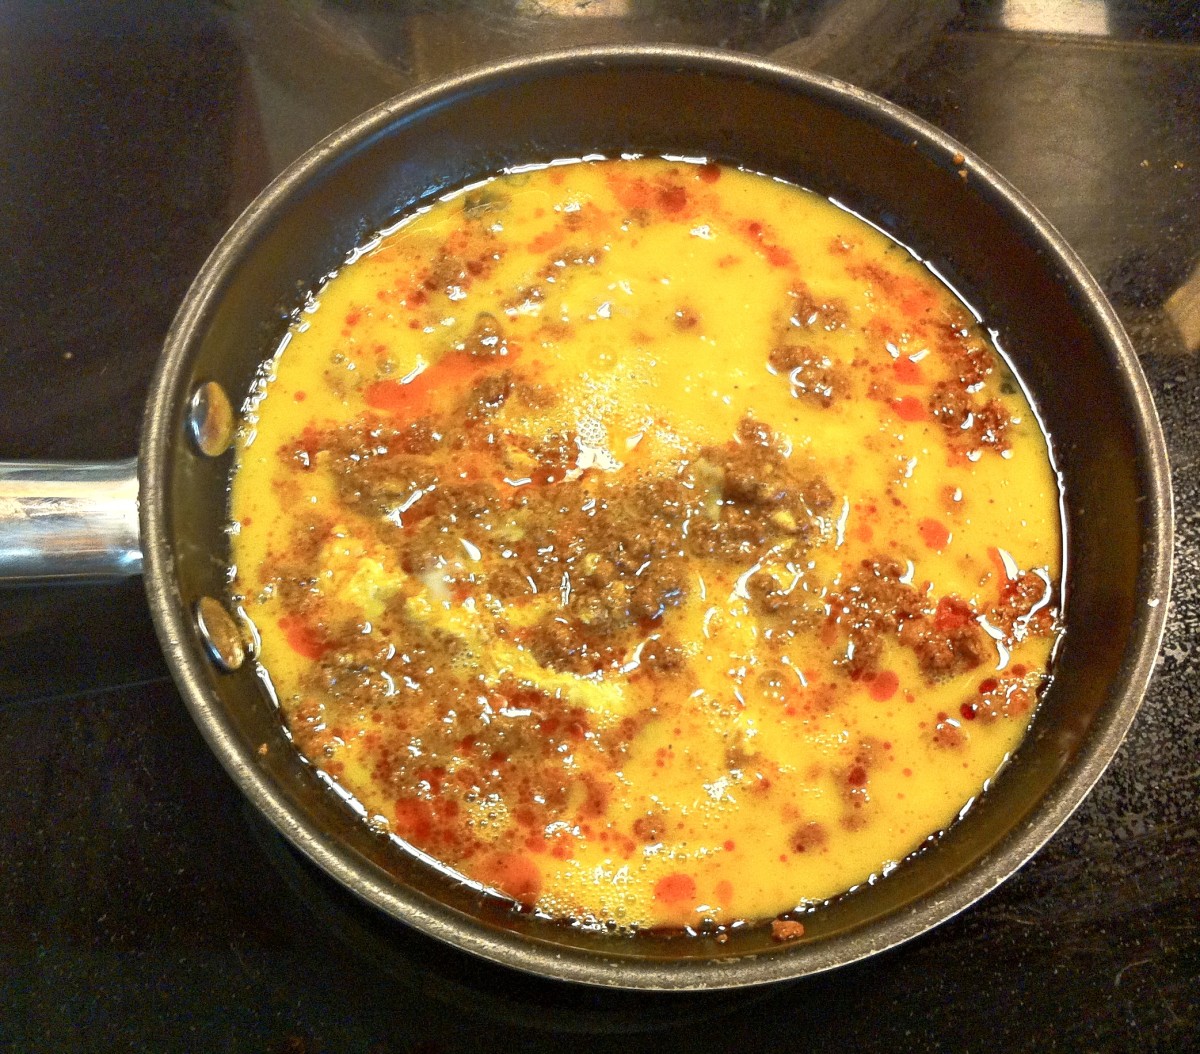 Add eggs to chorizo and cook until the eggs are set.